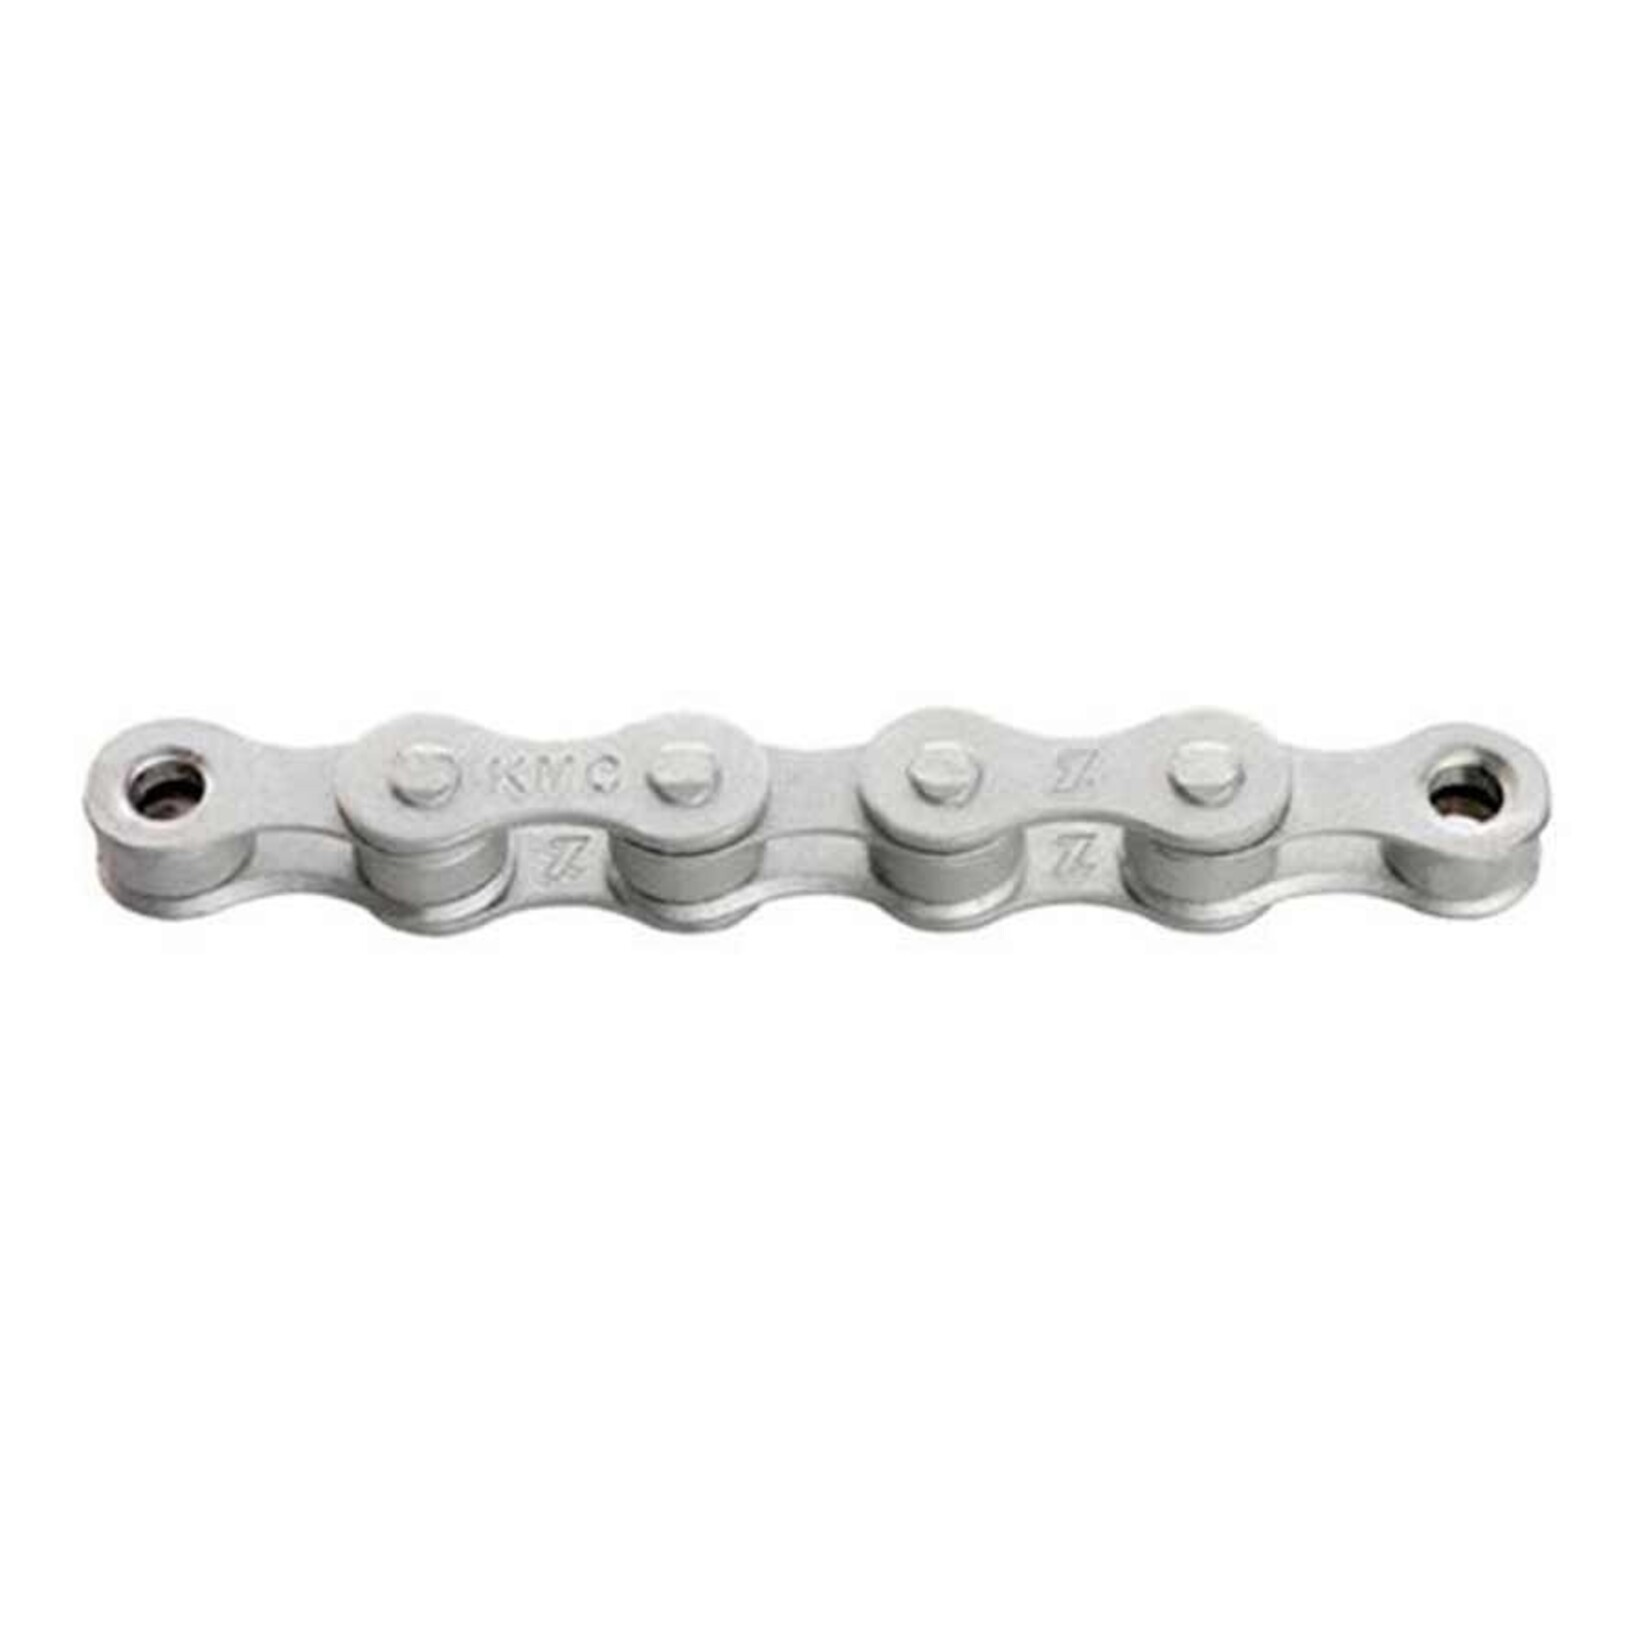 KMC, S1 RB, Chain, Speed: 1, 1/8'', Links: 112, Silver, Anti-Rust